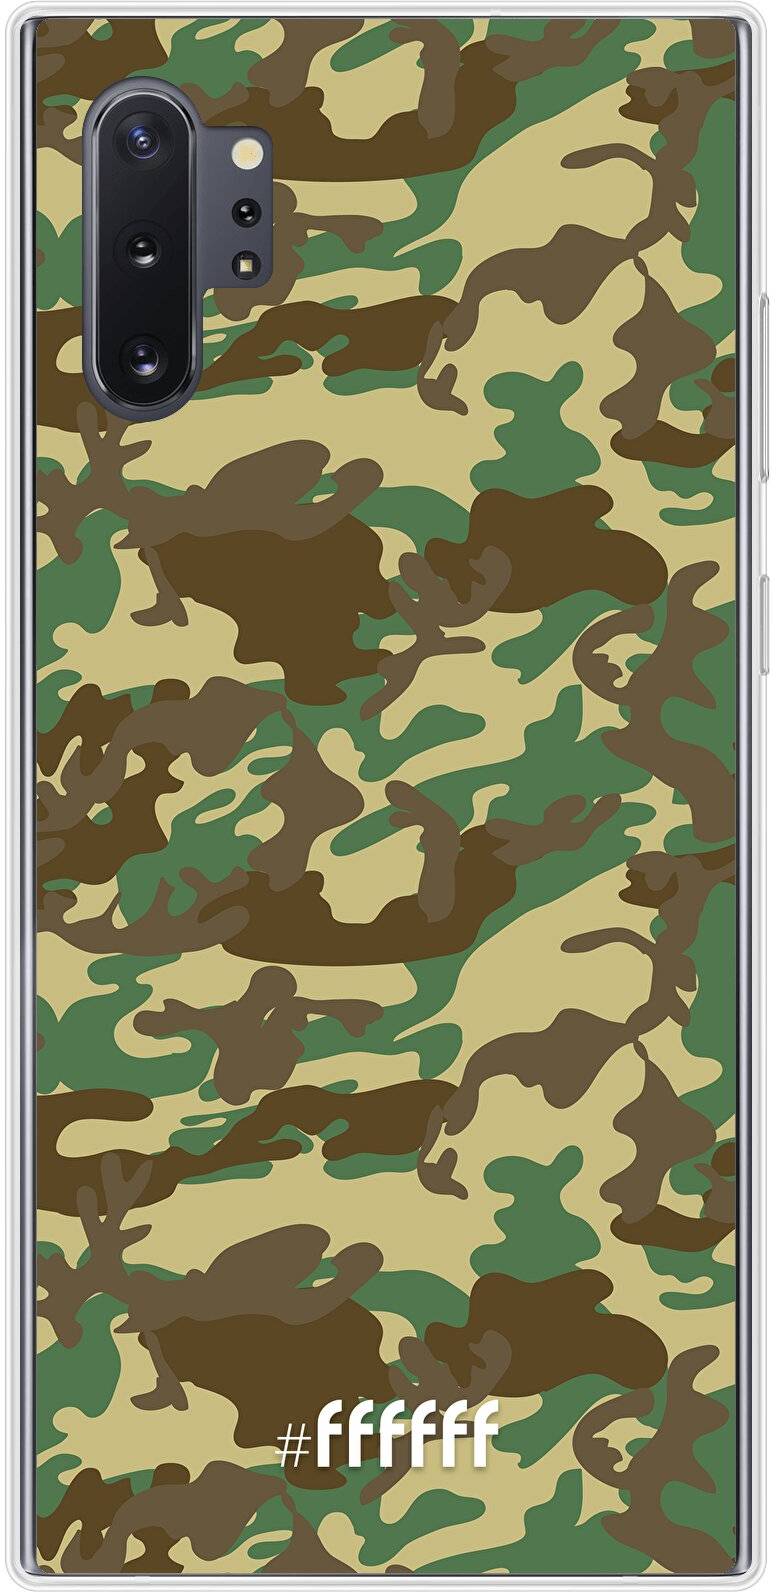 Jungle Camouflage Galaxy Note 10 Plus